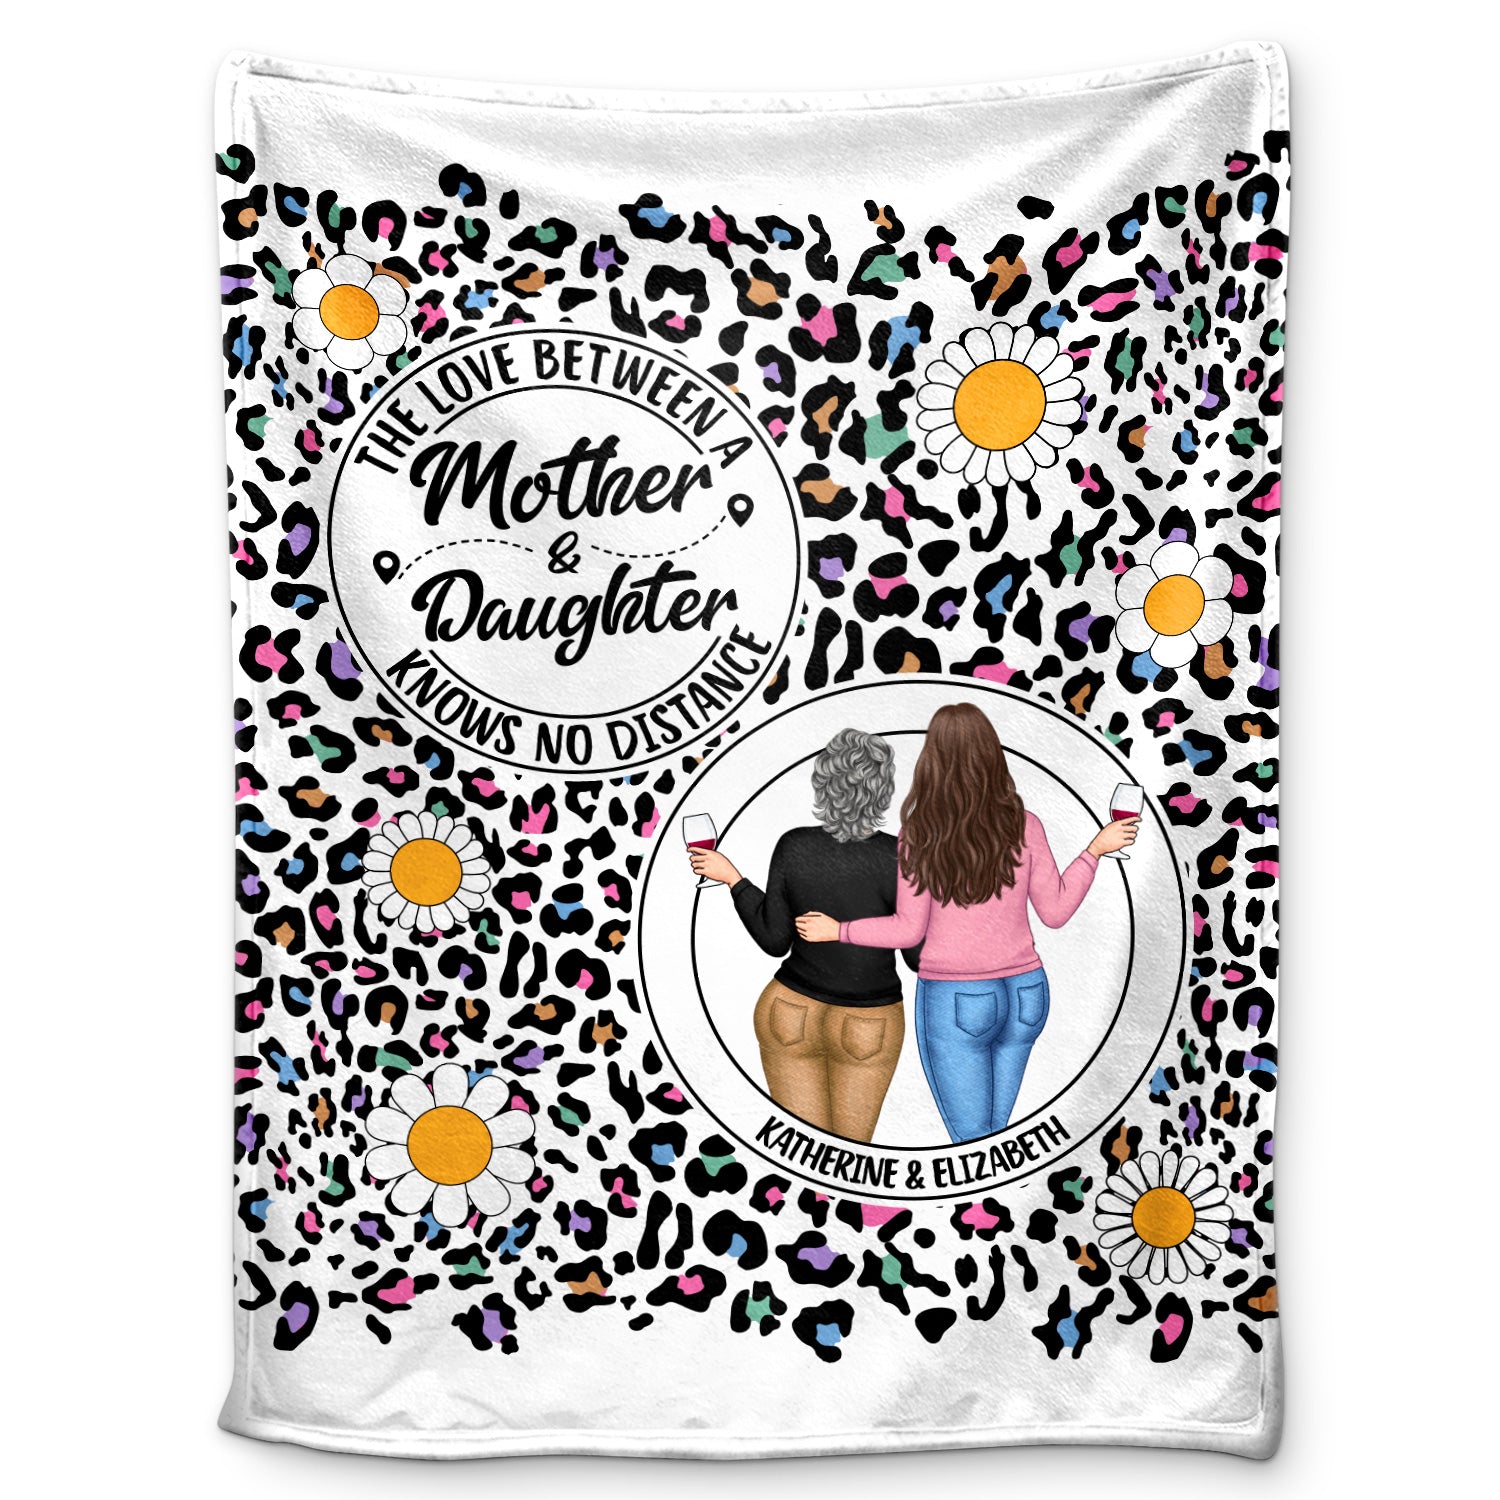 Knows No Distance - Gift For Mother And Daughter - Personalized Fleece Blanket, Sherpa Blanket